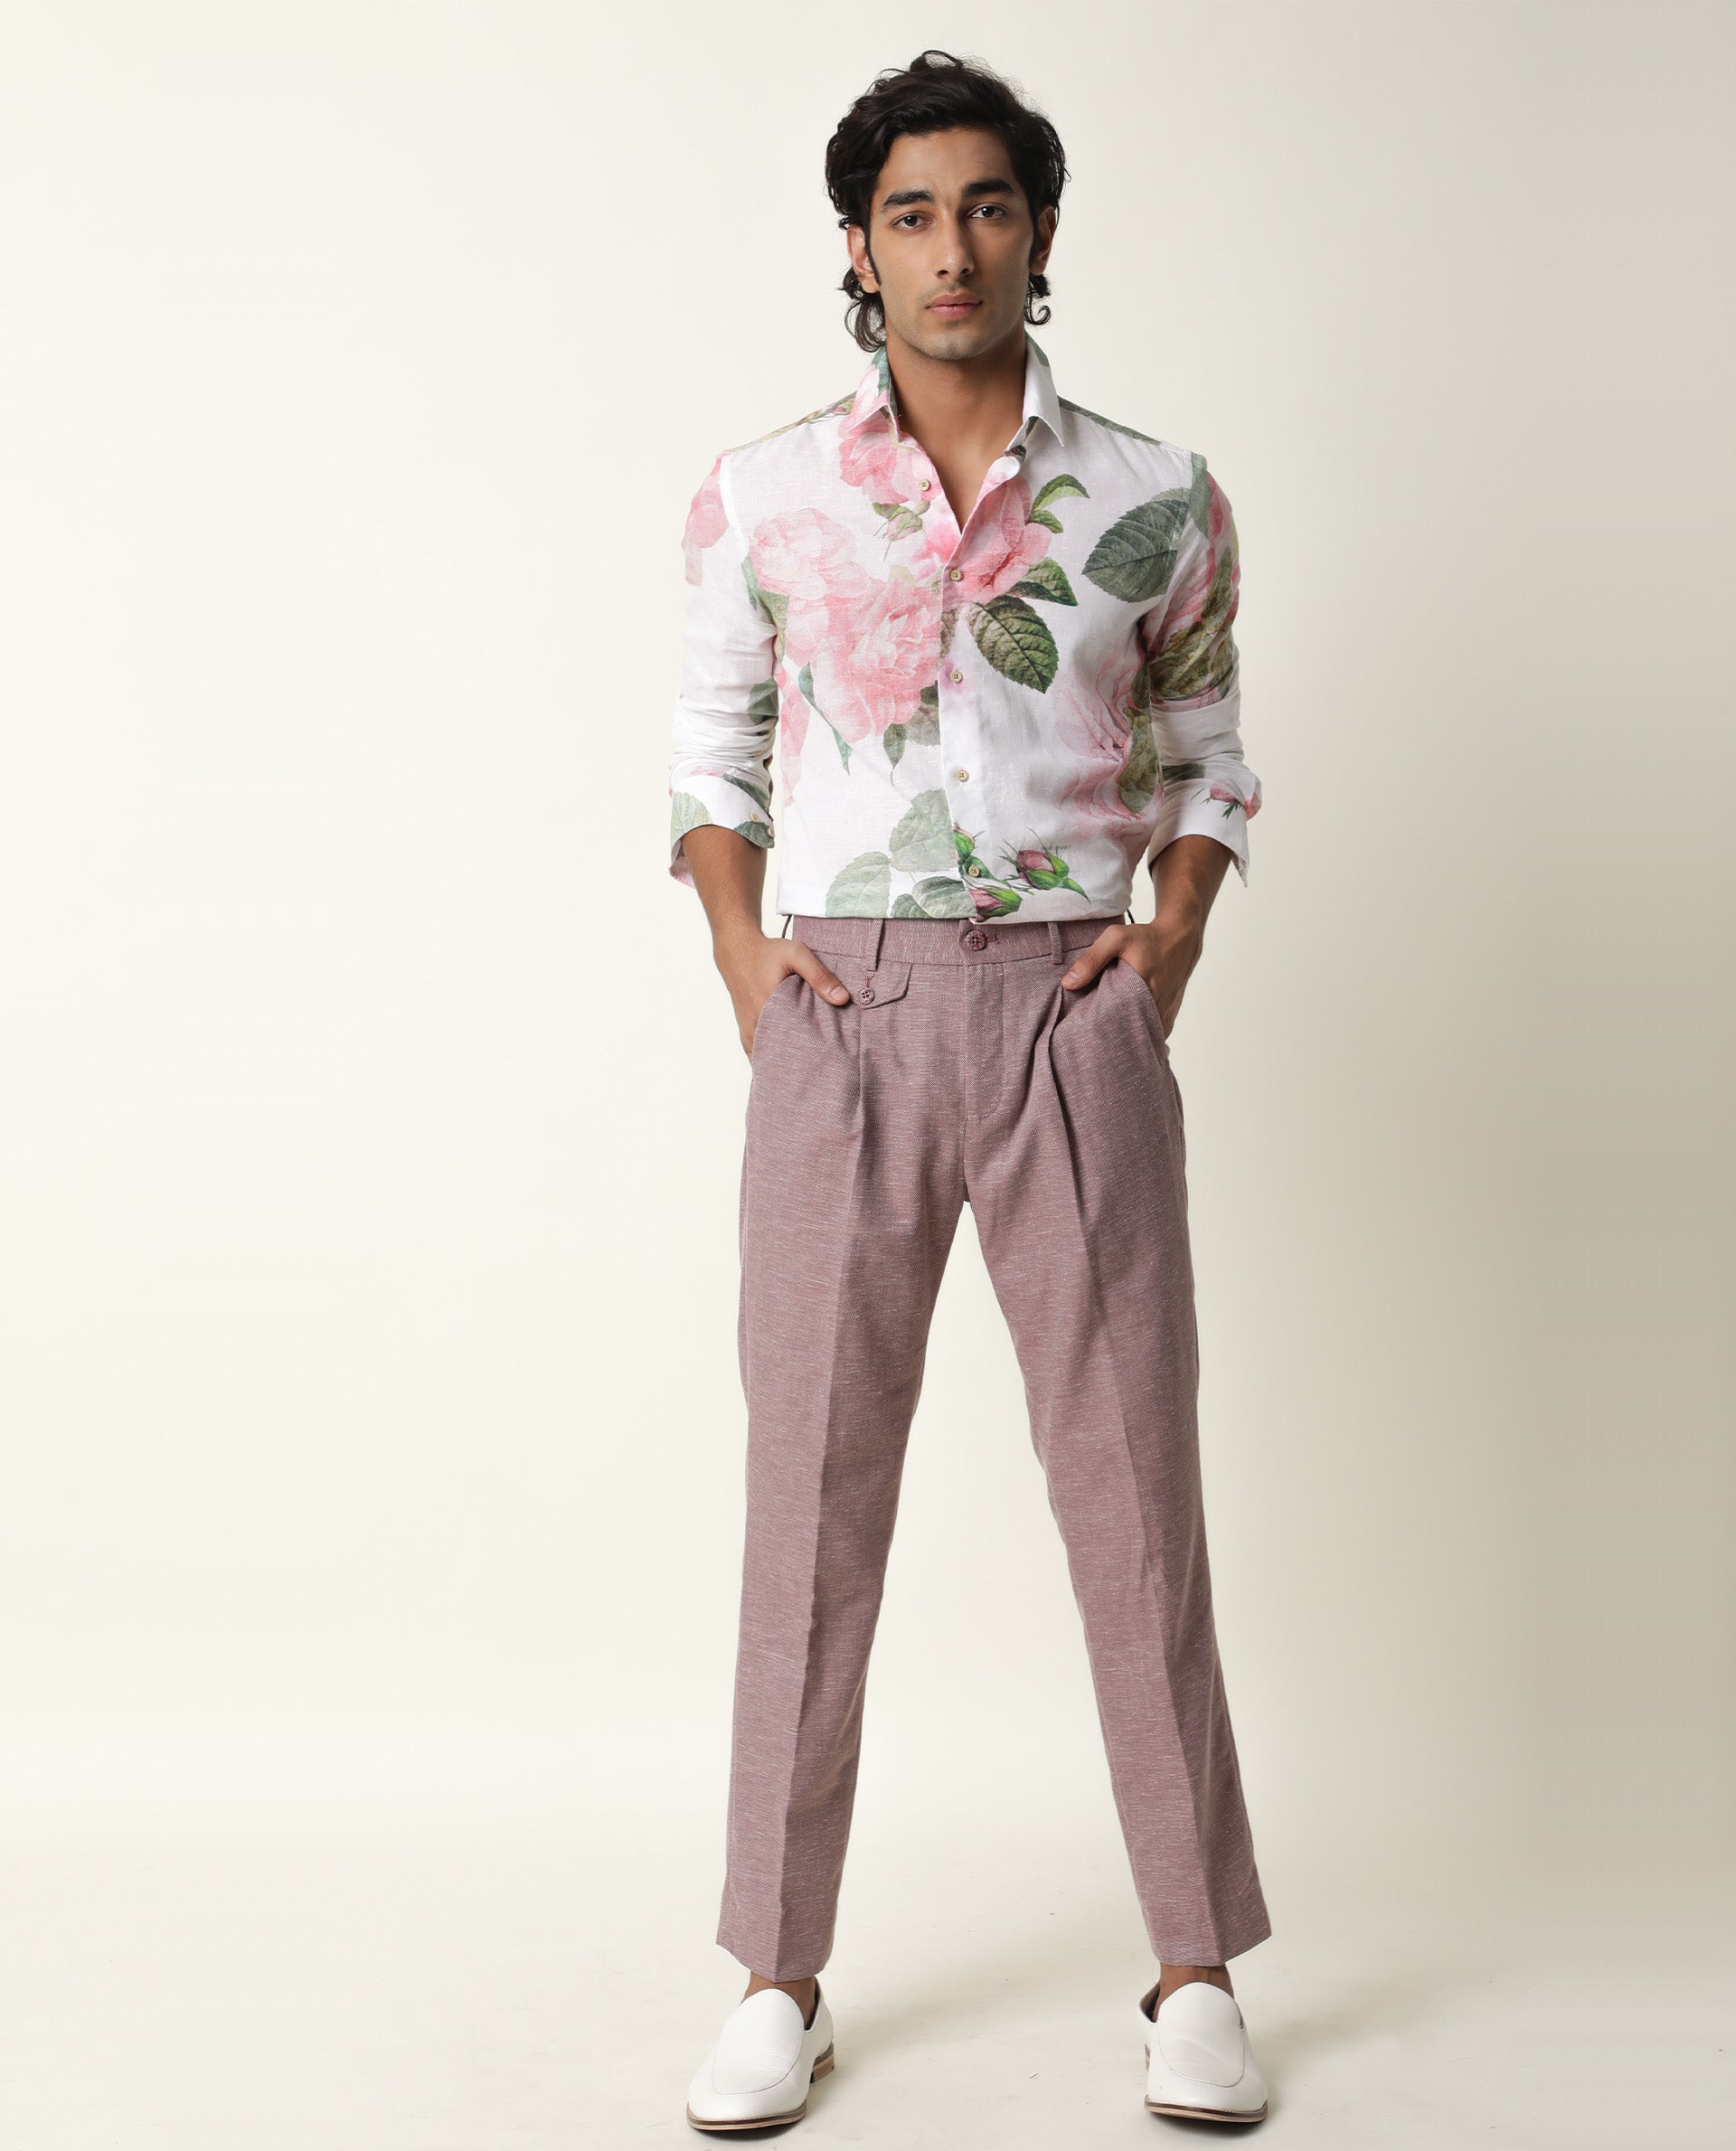 QZH.DUAO EMAOR Floral Printed Casual Pants for Men